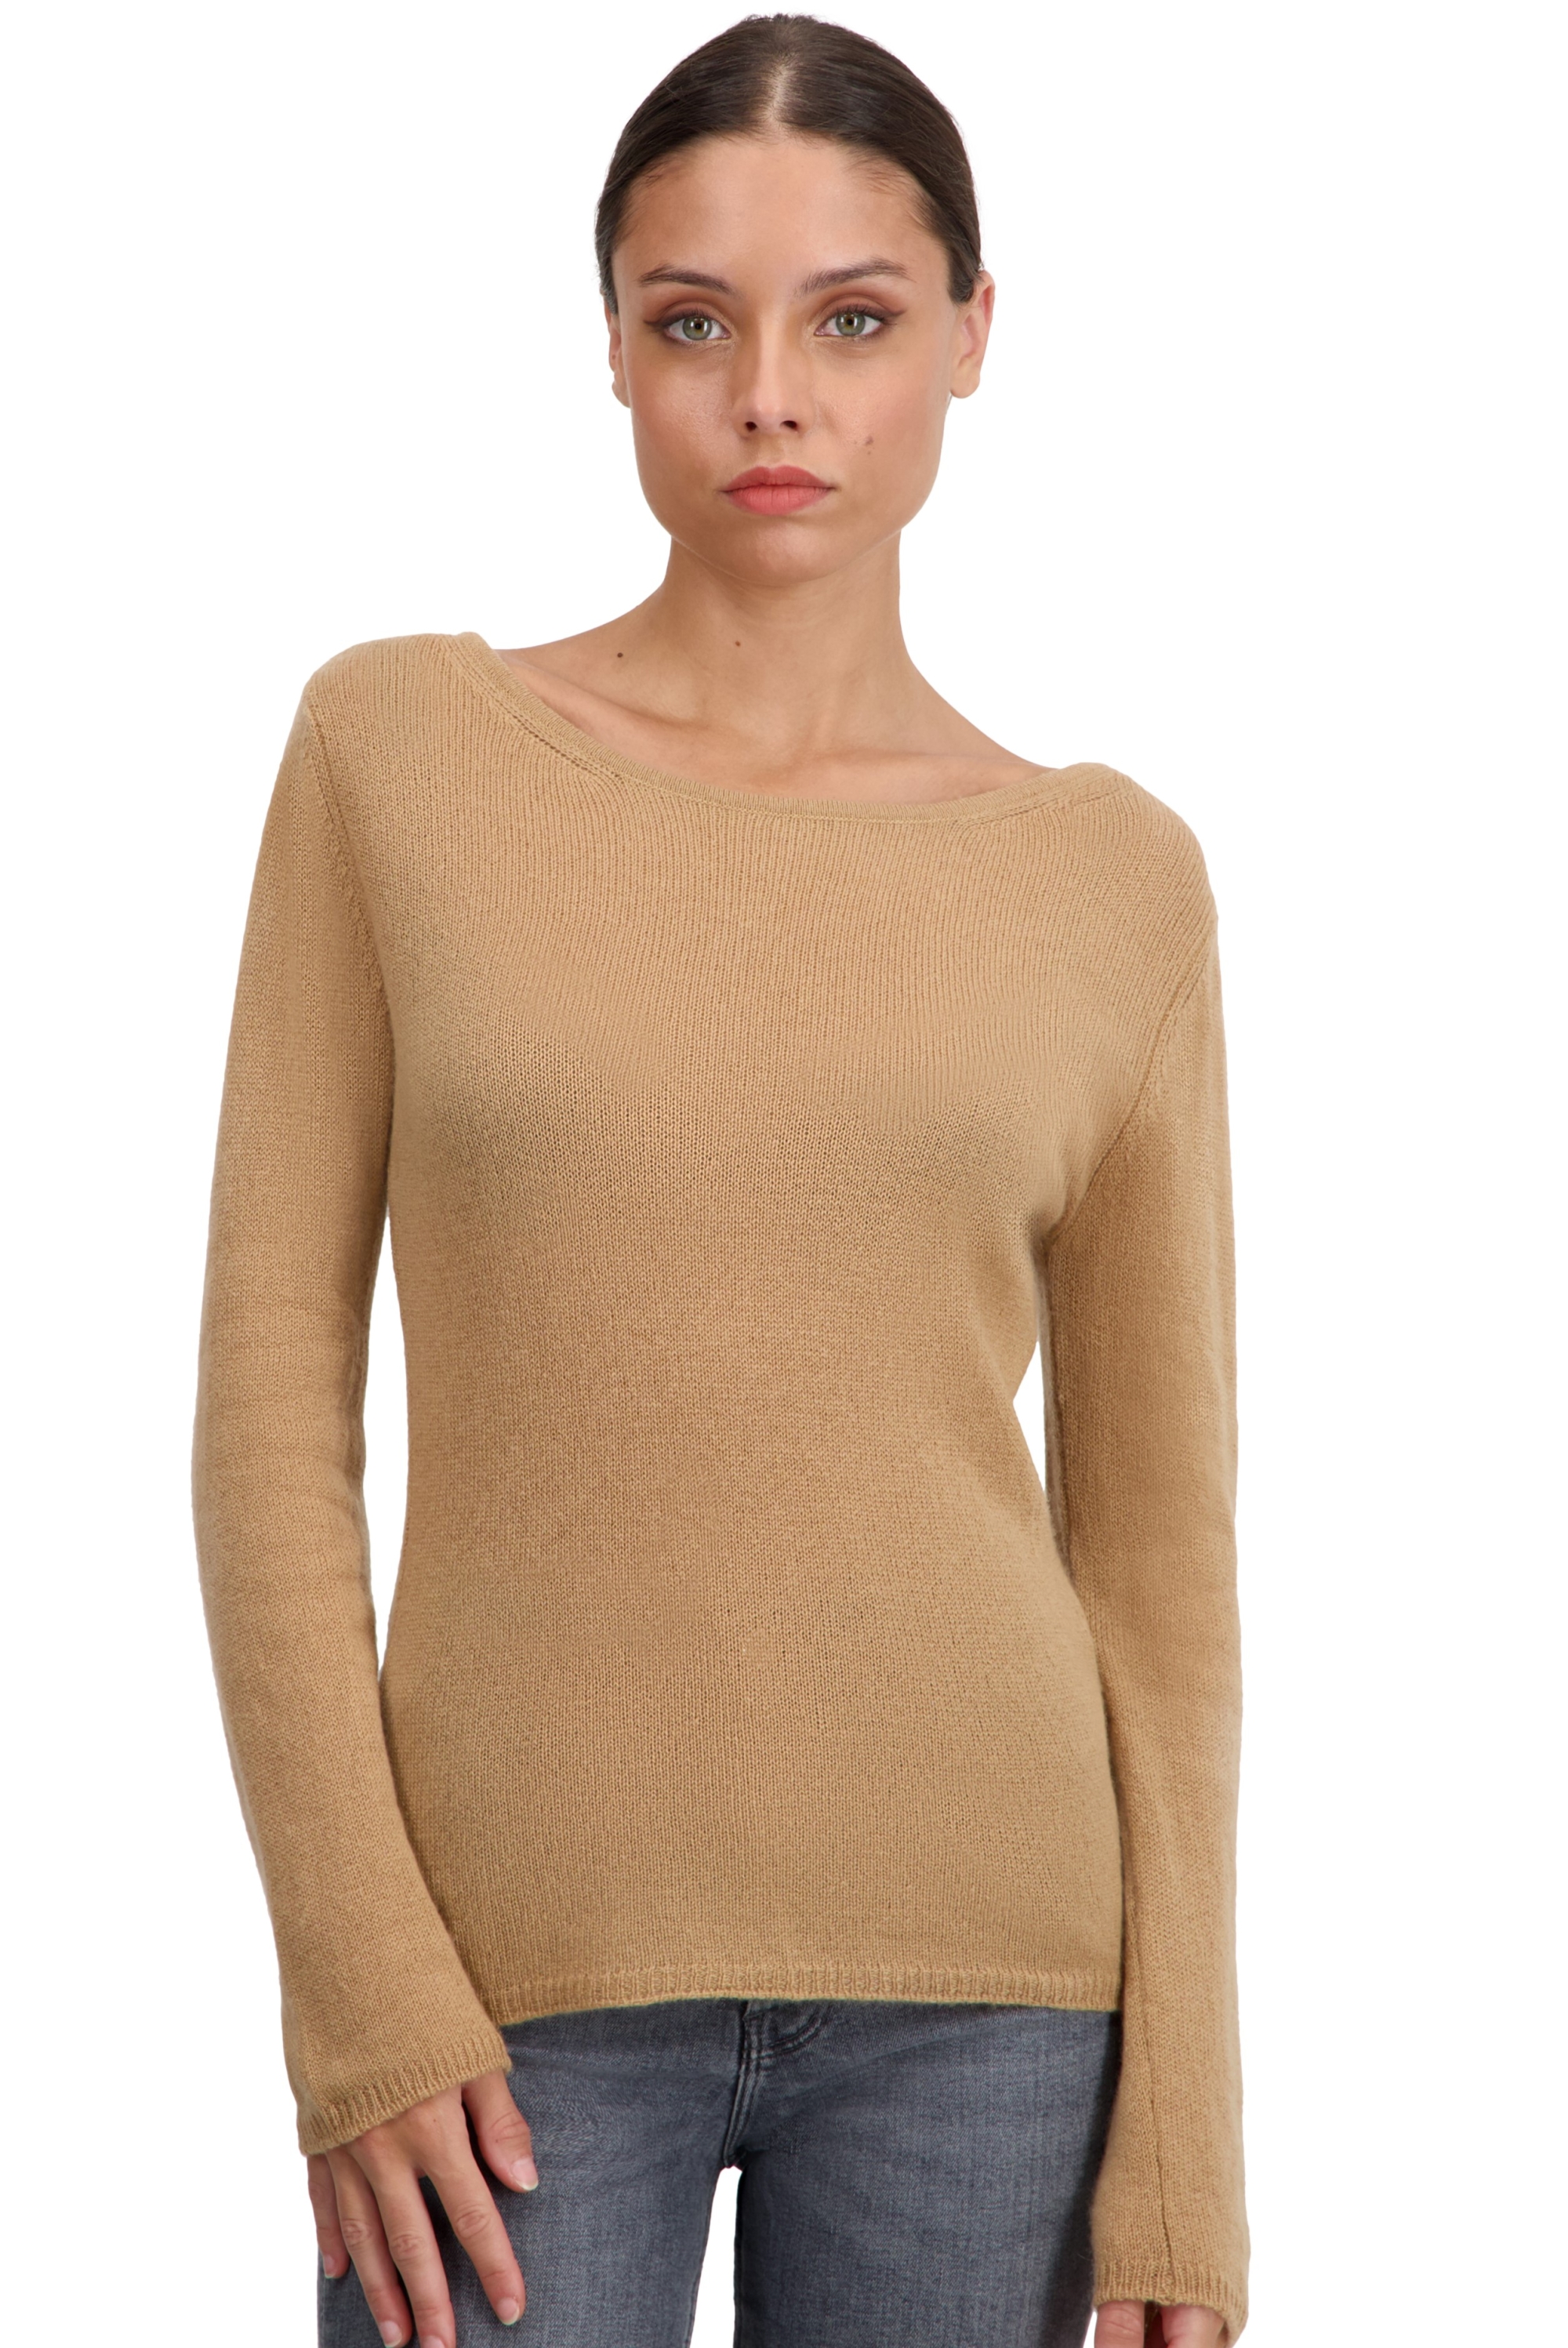 Cashmere ladies spring summer collection caleen camel 3xl